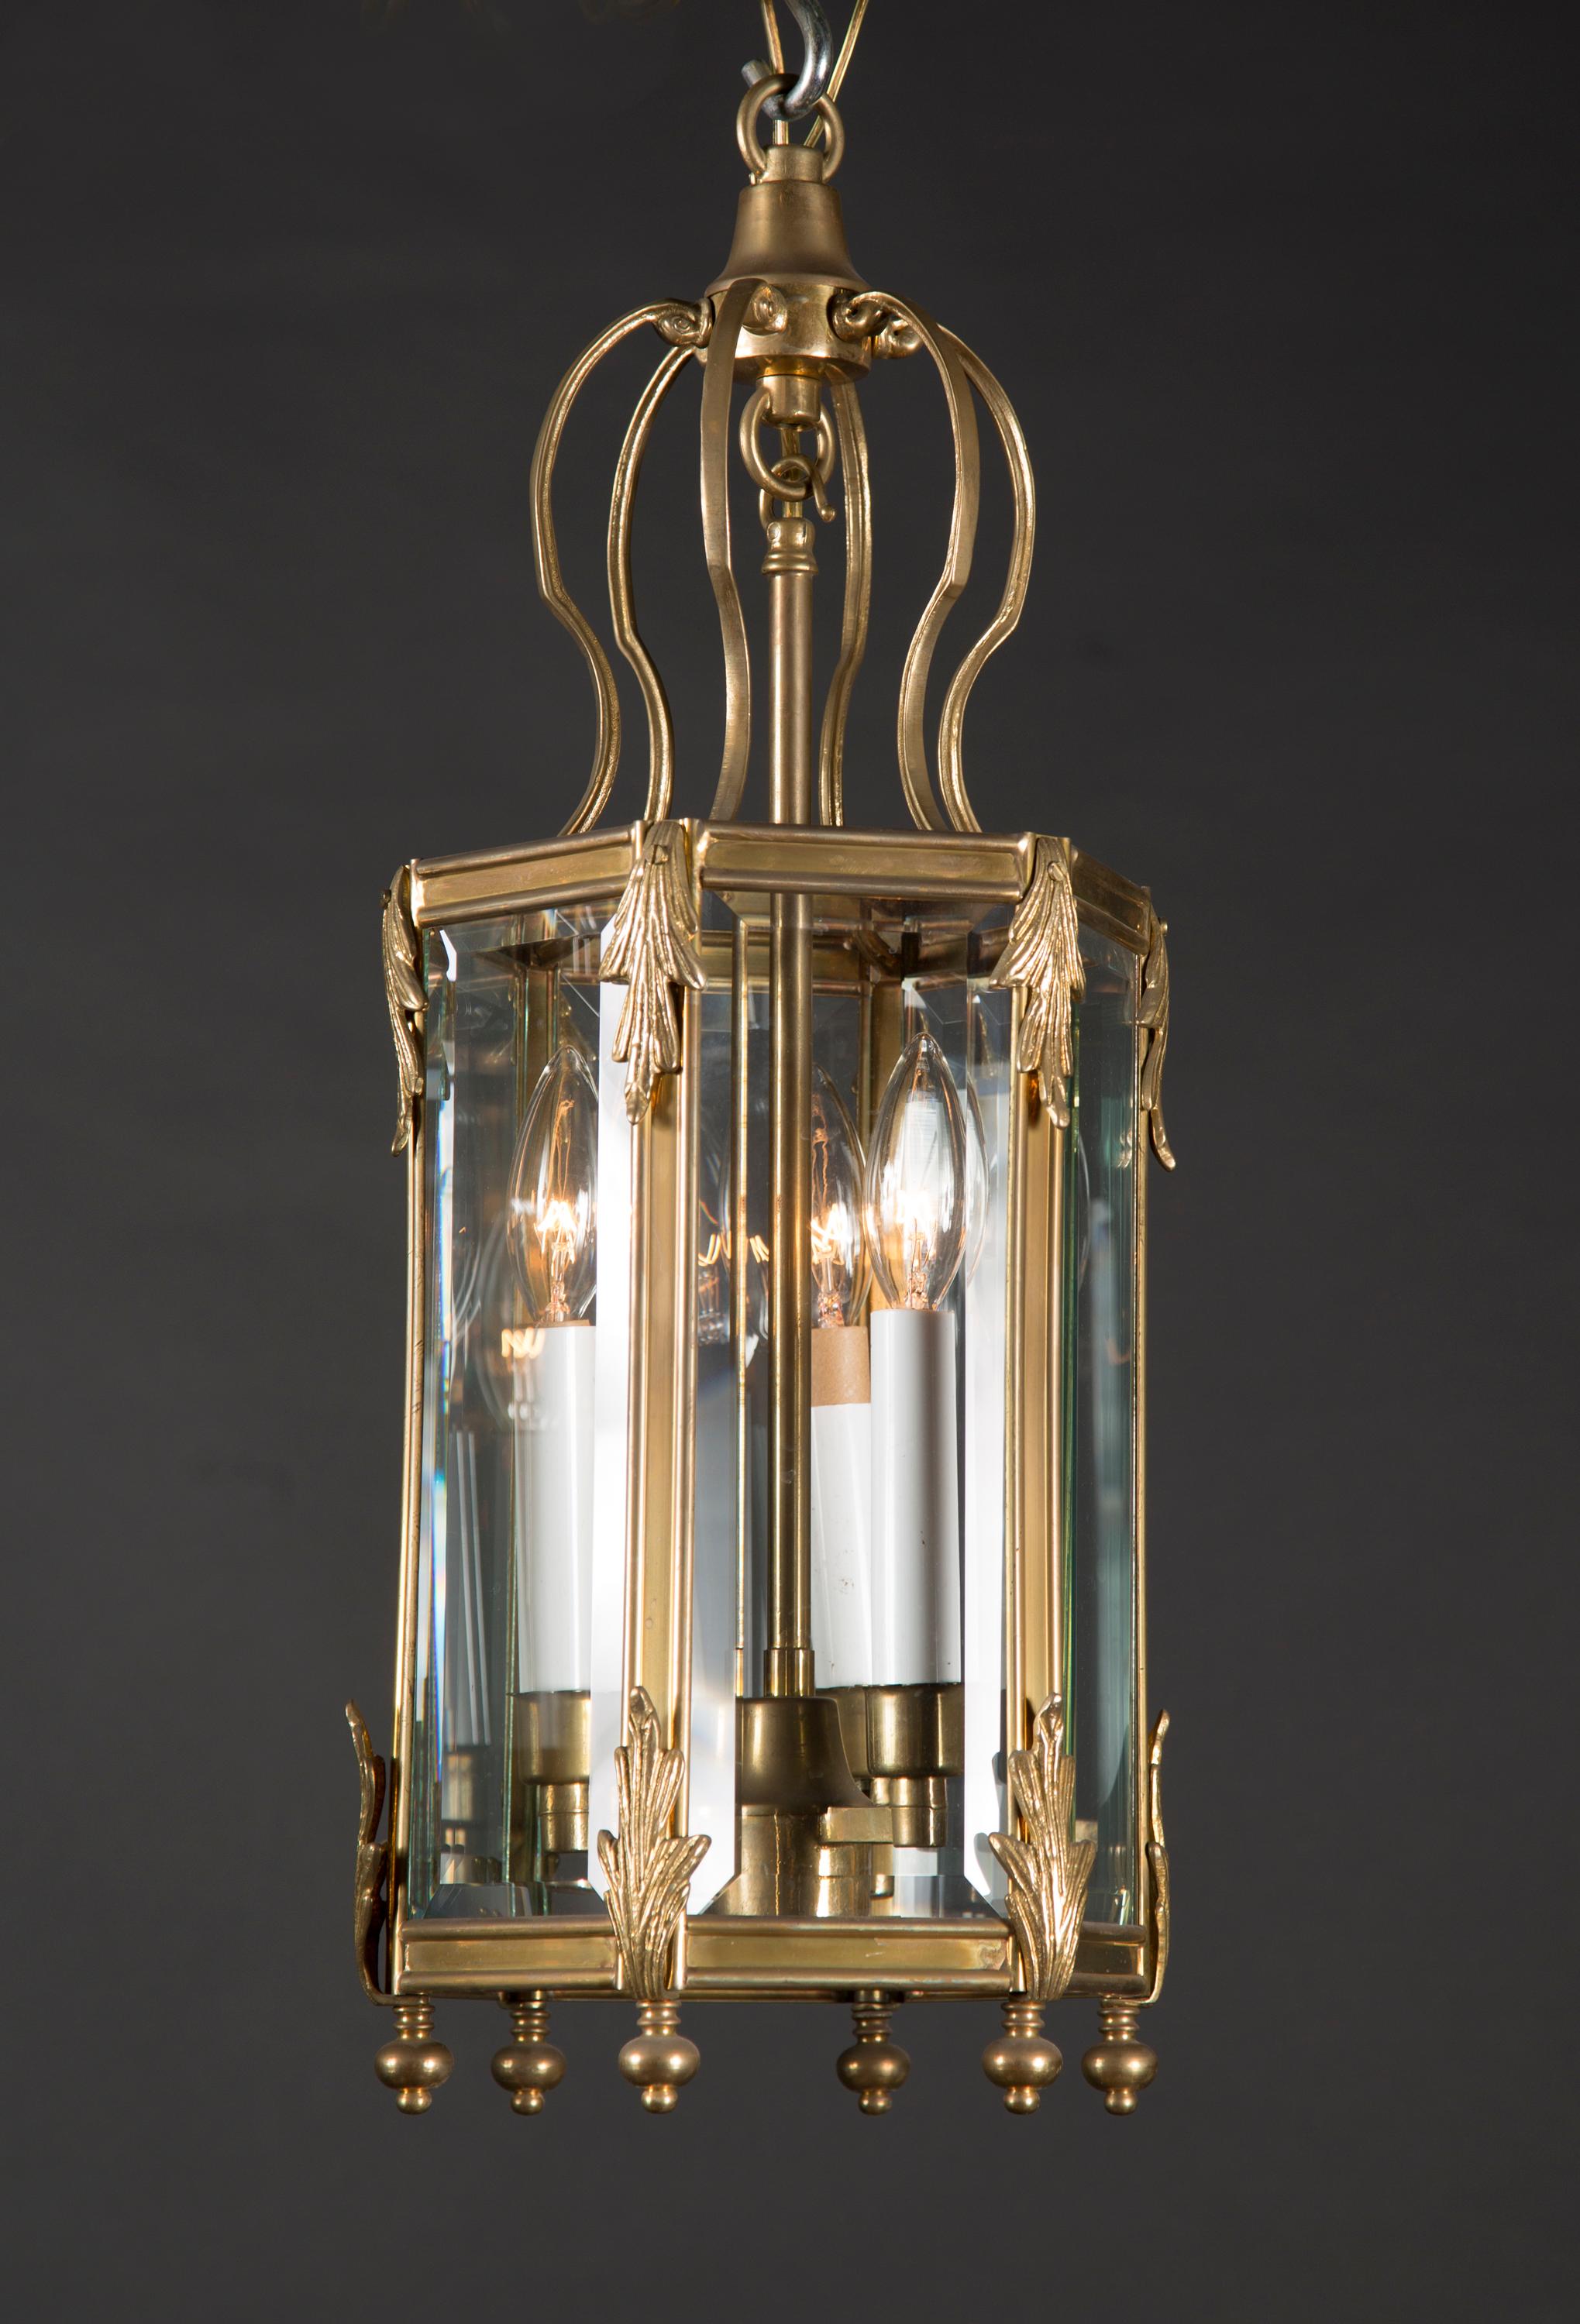 This pair of French hexagonal lanterns dates back to the mid 20th century. Made of bronze, they feature six panels of bevelled glass. The bird cage shaped top extends down to the hexagonal center which features twelve detailed acanthus leaves and